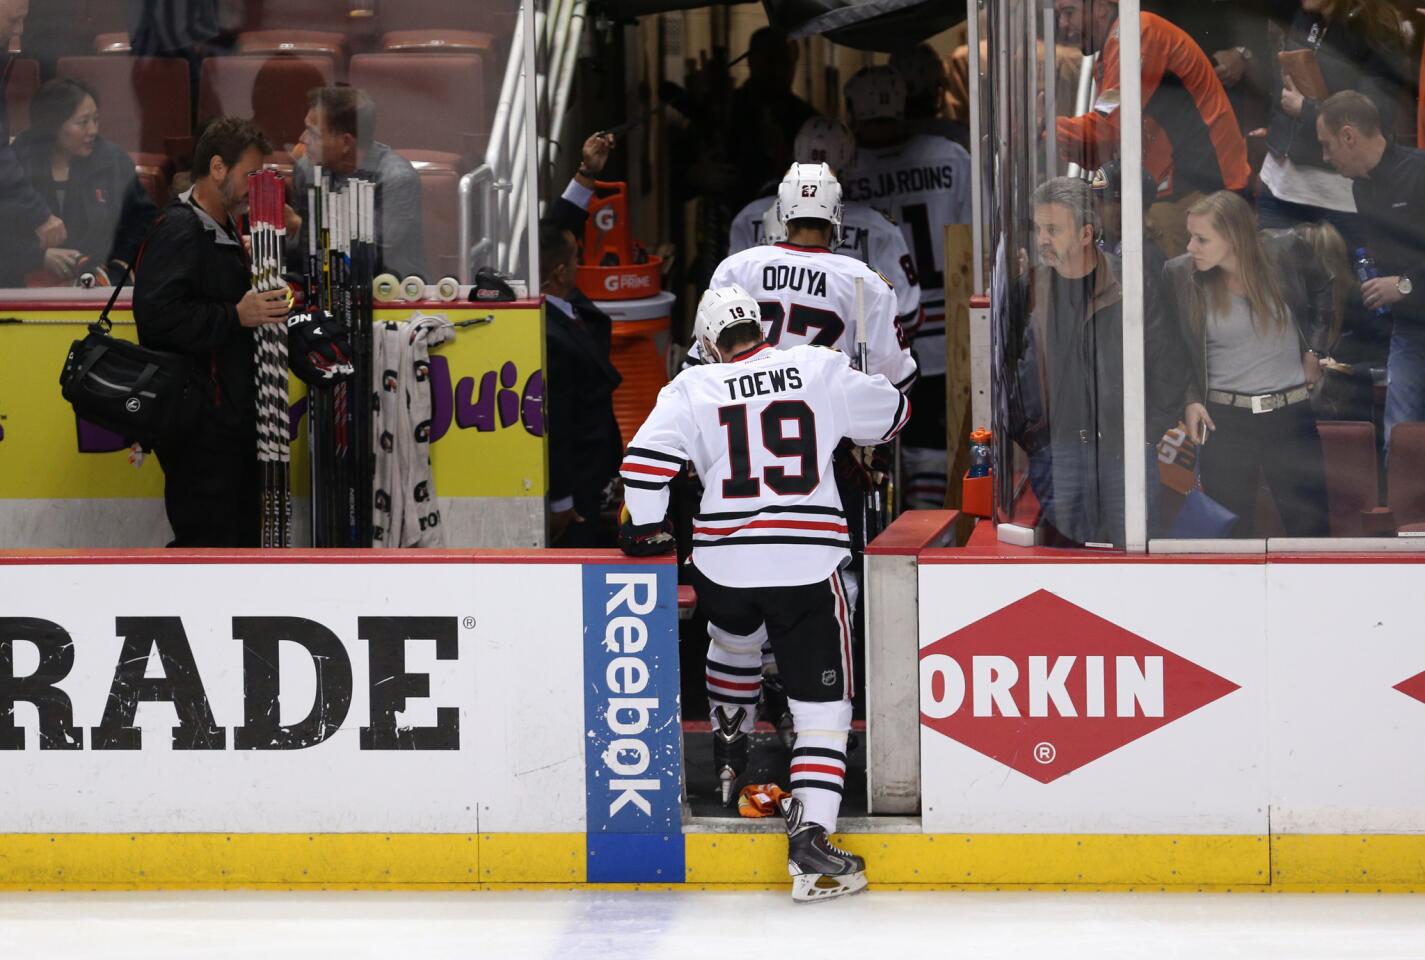 The Blackhawks walk off the ice after a brief overtime.